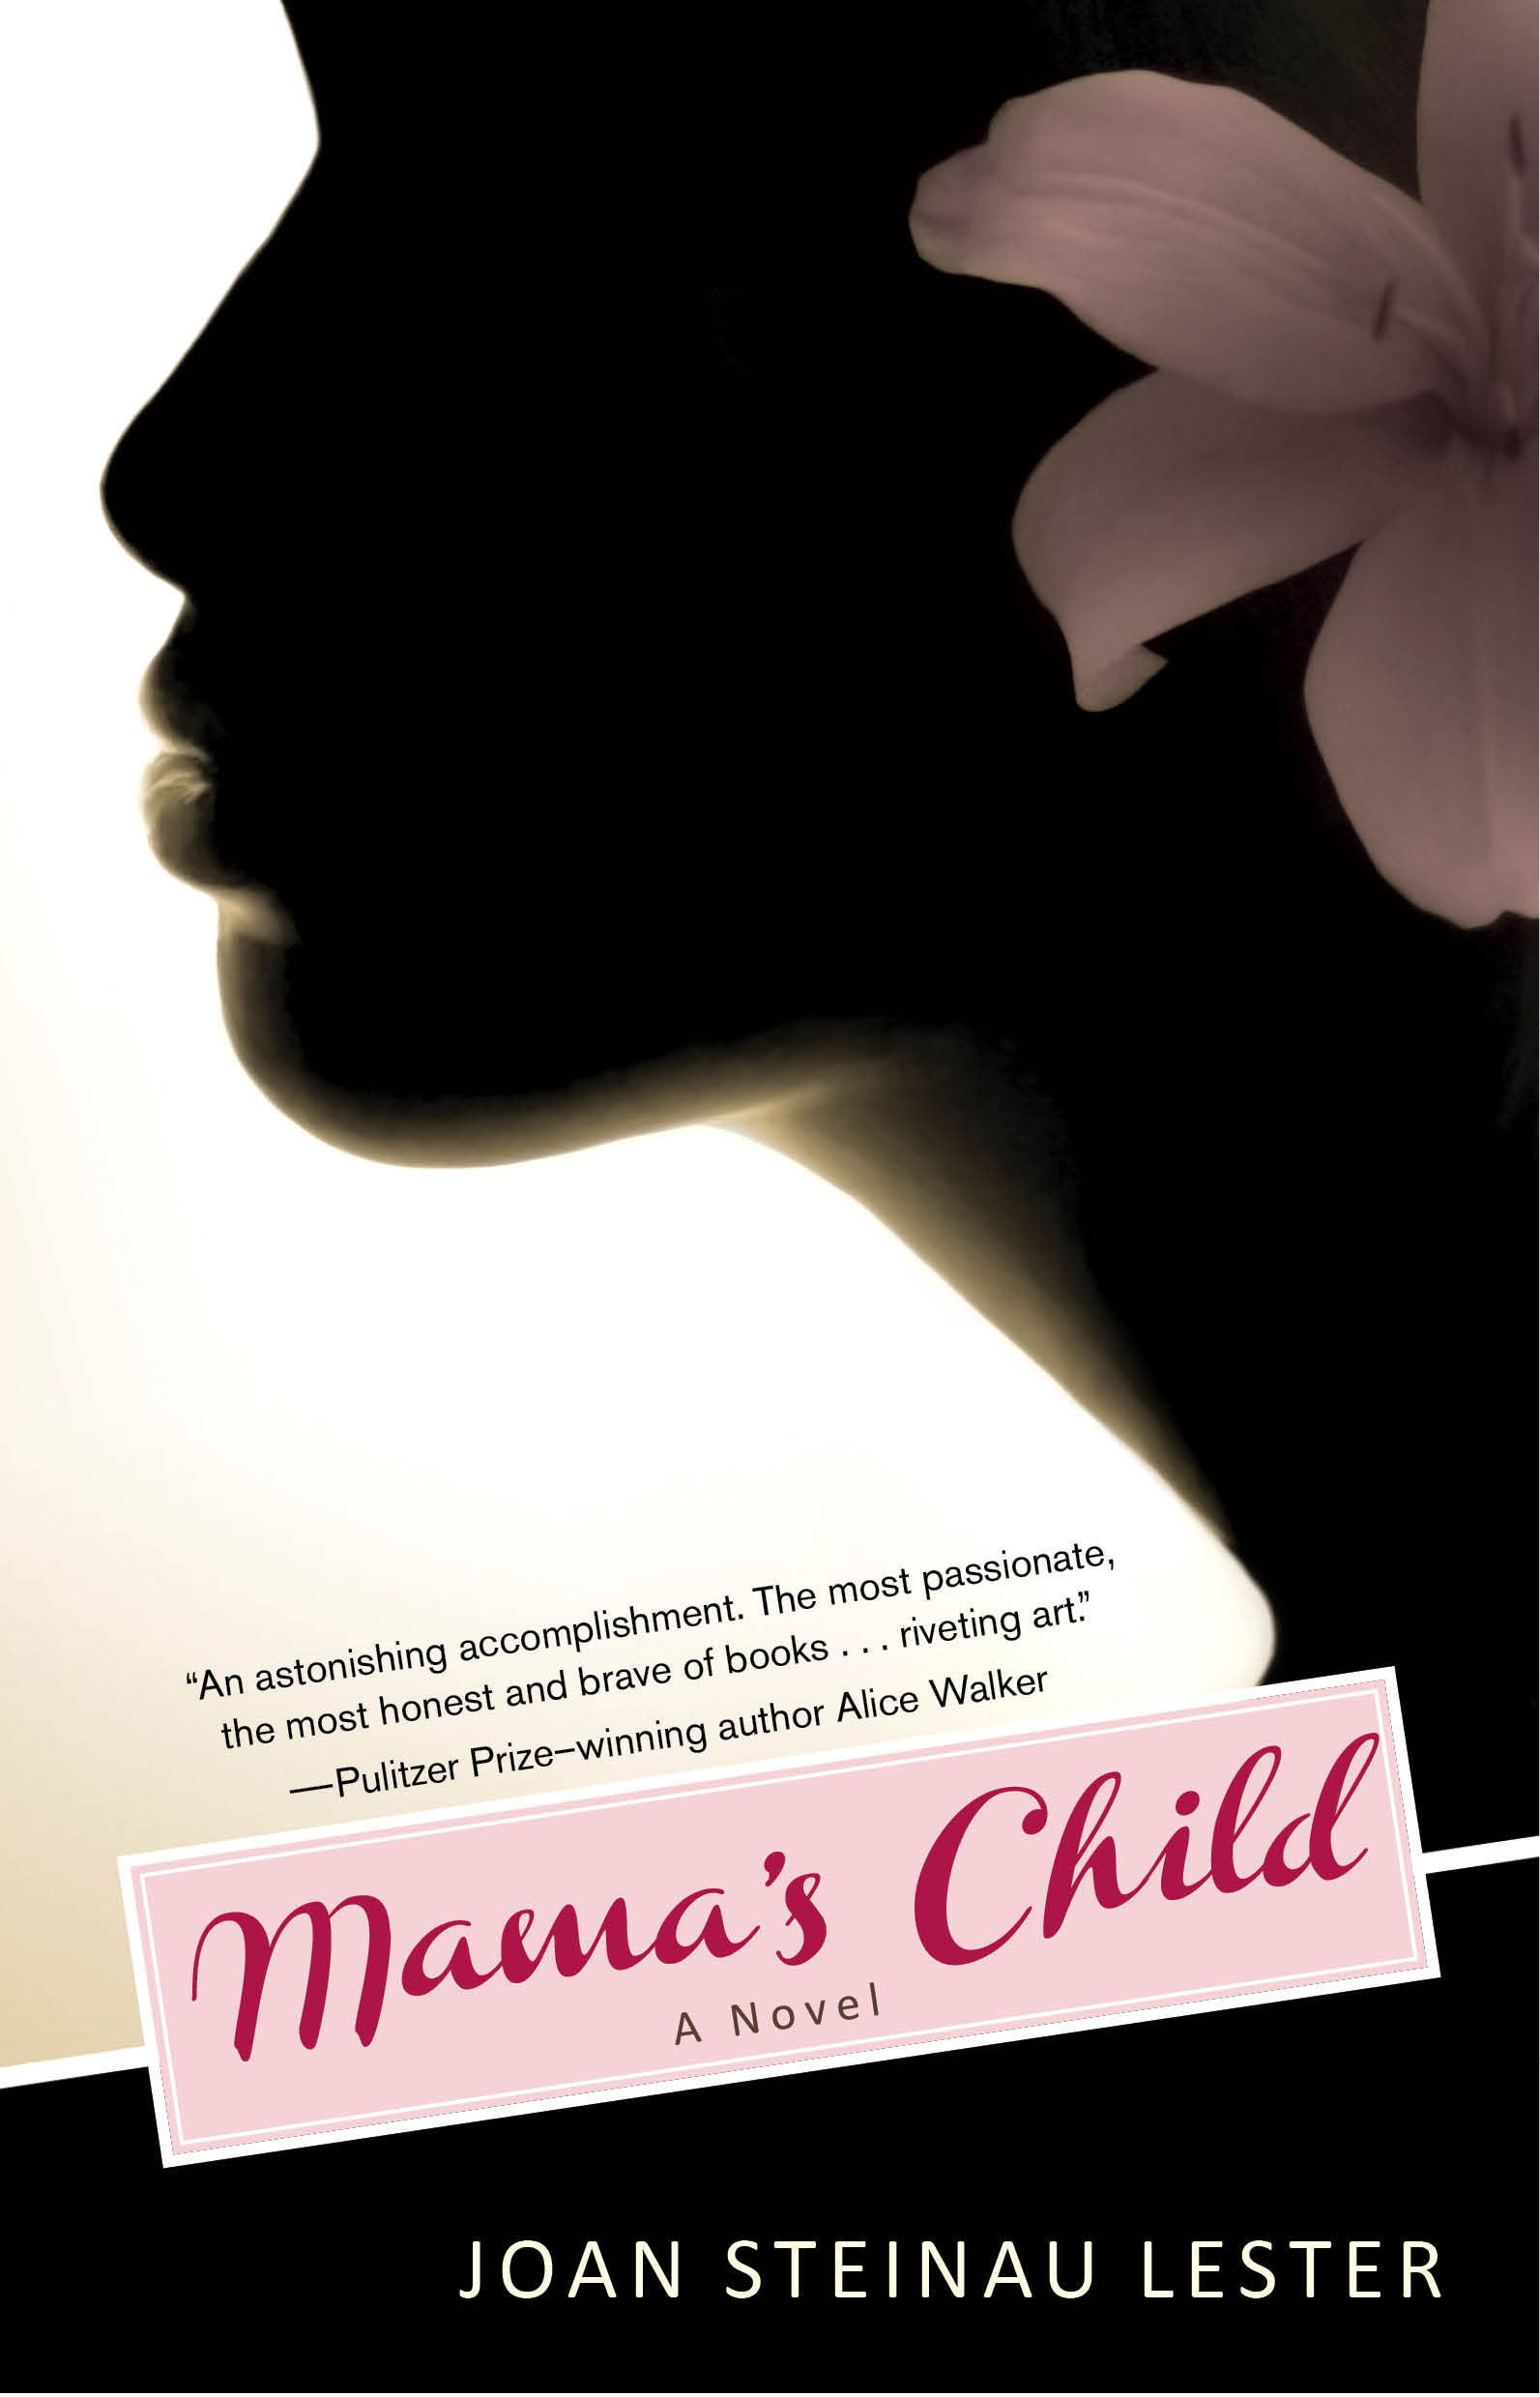 MAMA'S CHILD, a novel. Foreword by Alice Walker